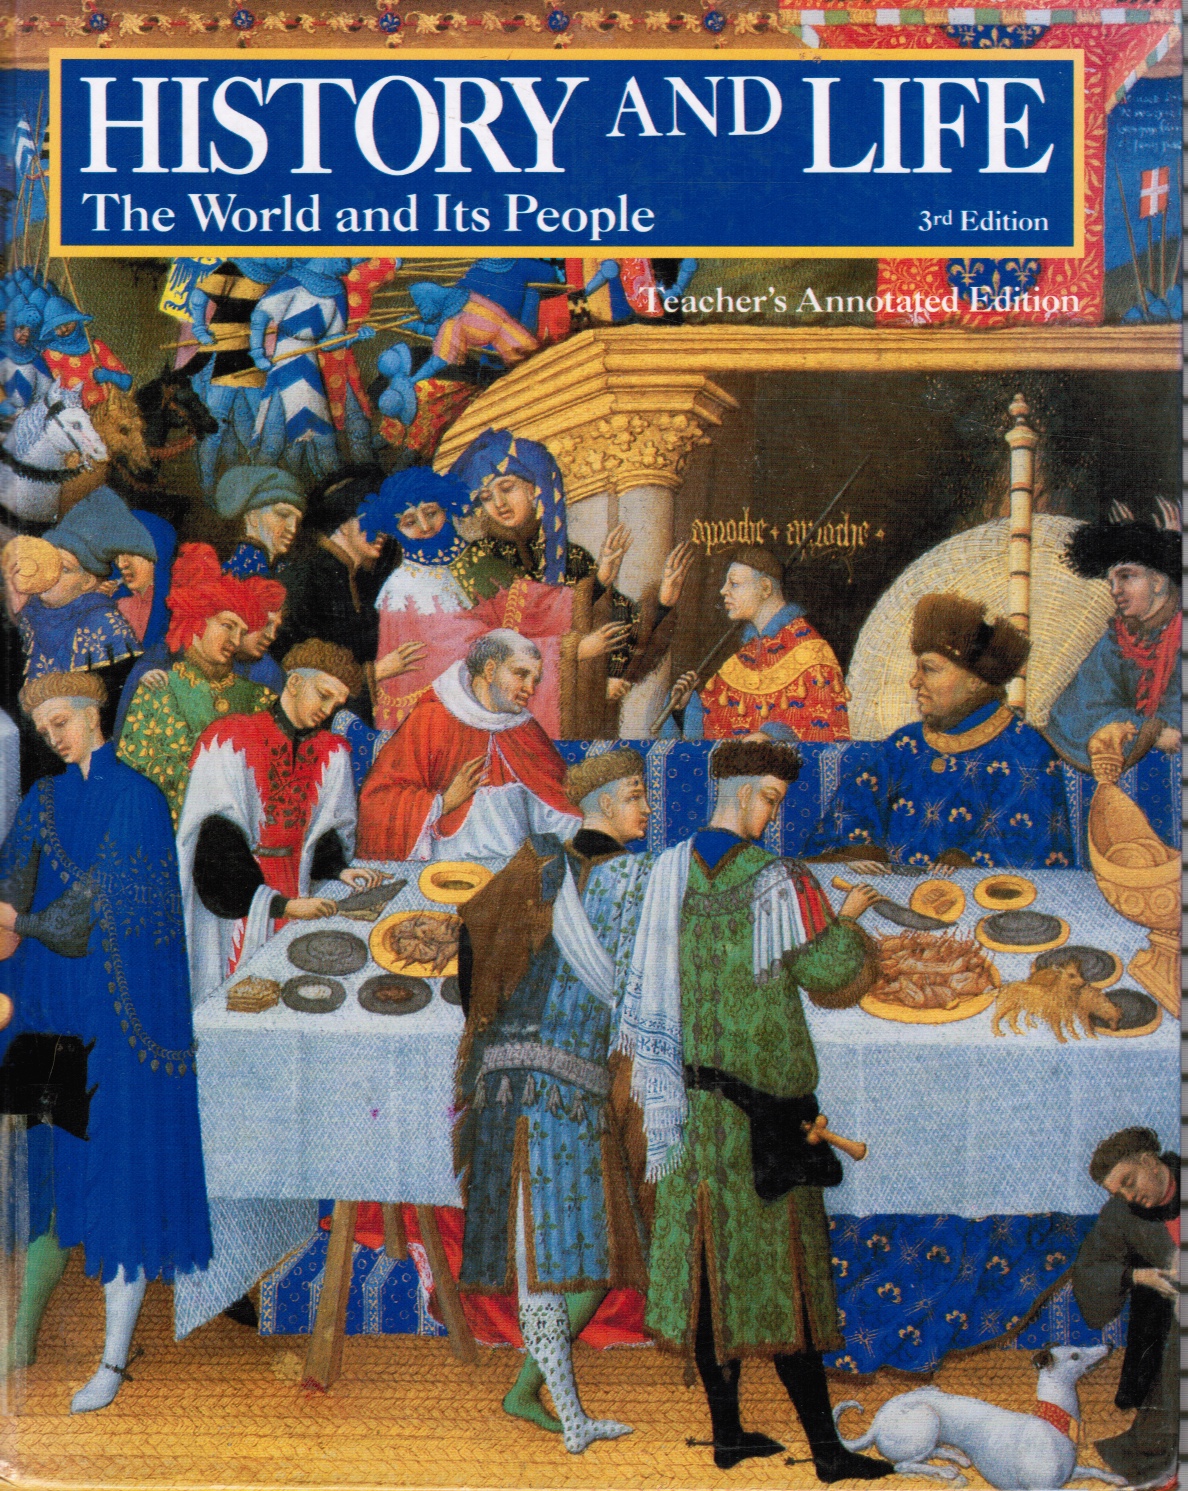 WALLBANK, T. WALTER; ARNOLD SCHRIER; DONNAMAIER; PATRICIA GUTIERREZ-SMITH - History and Life: The World and Its People: Teacher's Annotated Edition